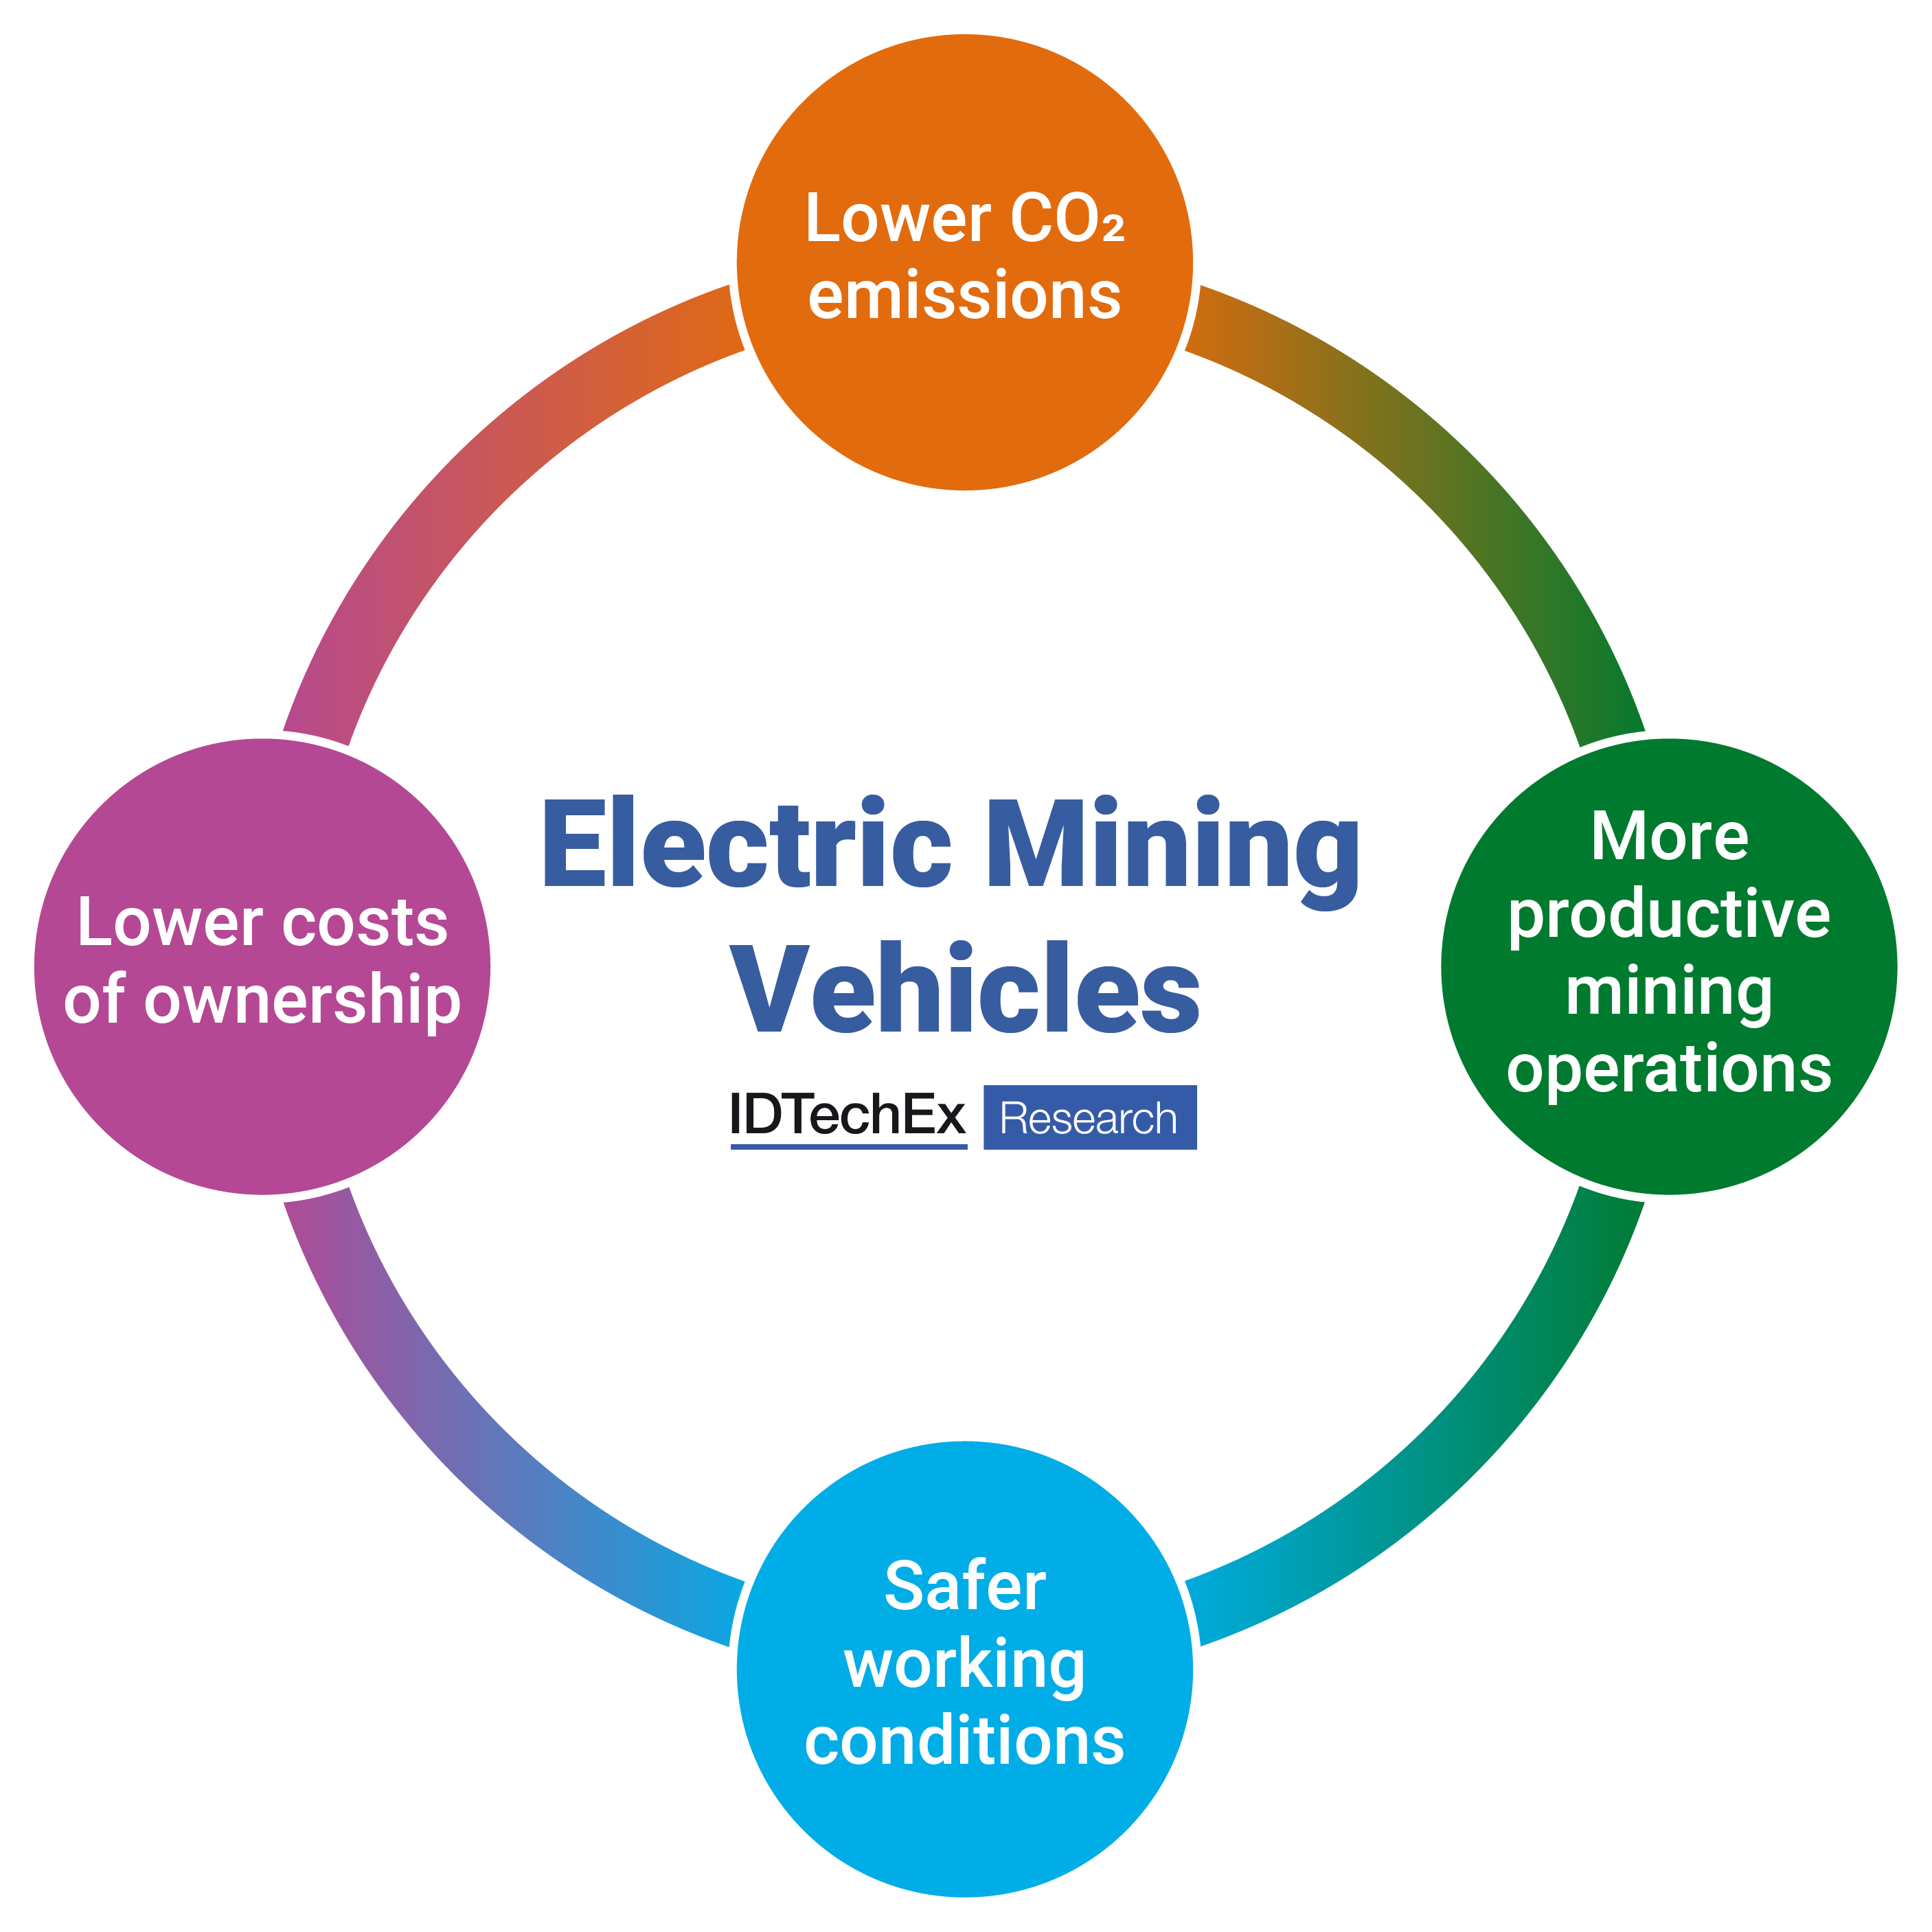 Key benefits of electric mining vehicles. Source IDTechEx.png